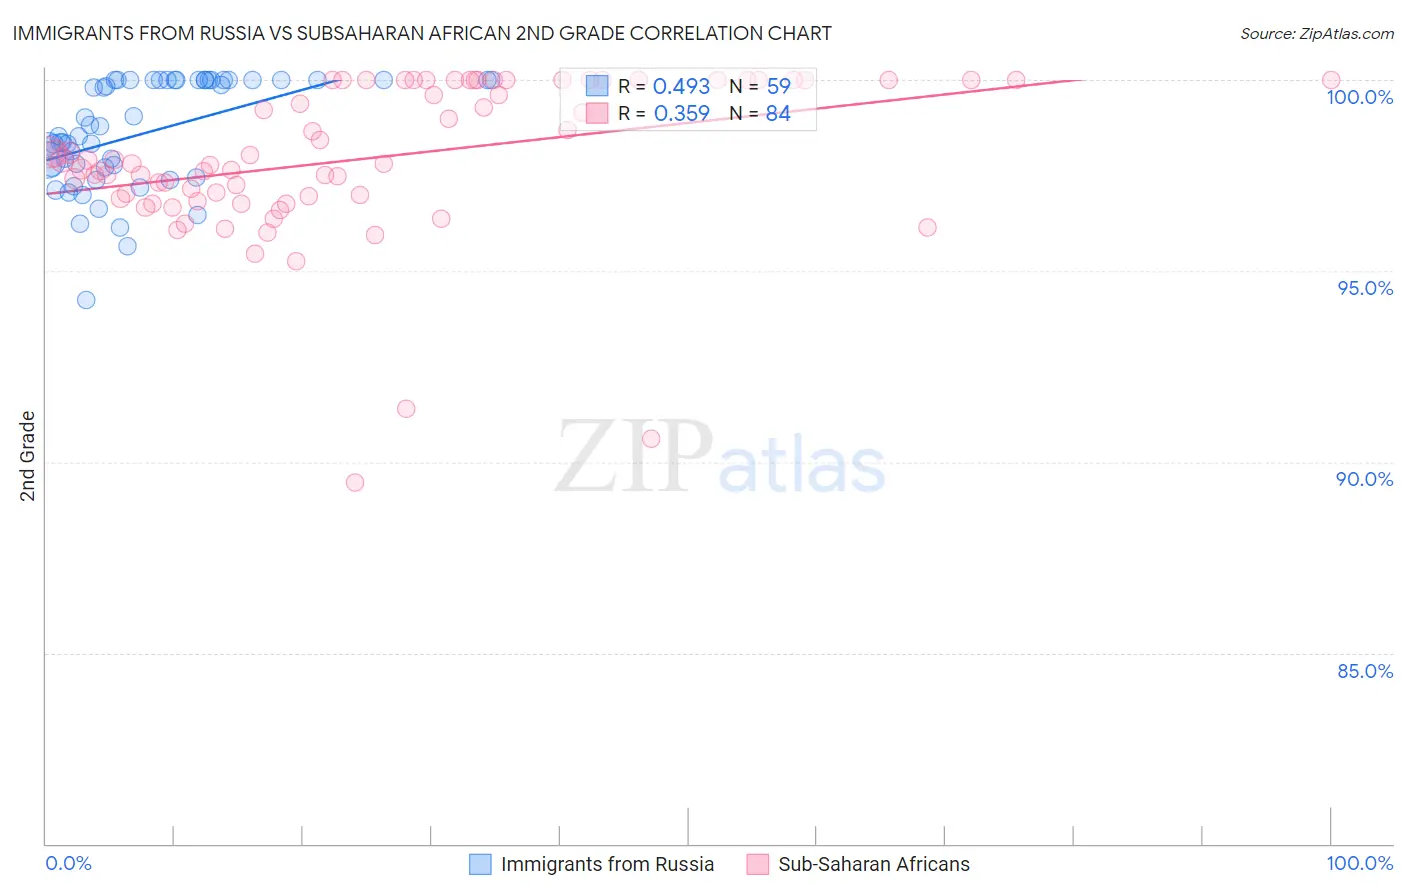 Immigrants from Russia vs Subsaharan African 2nd Grade